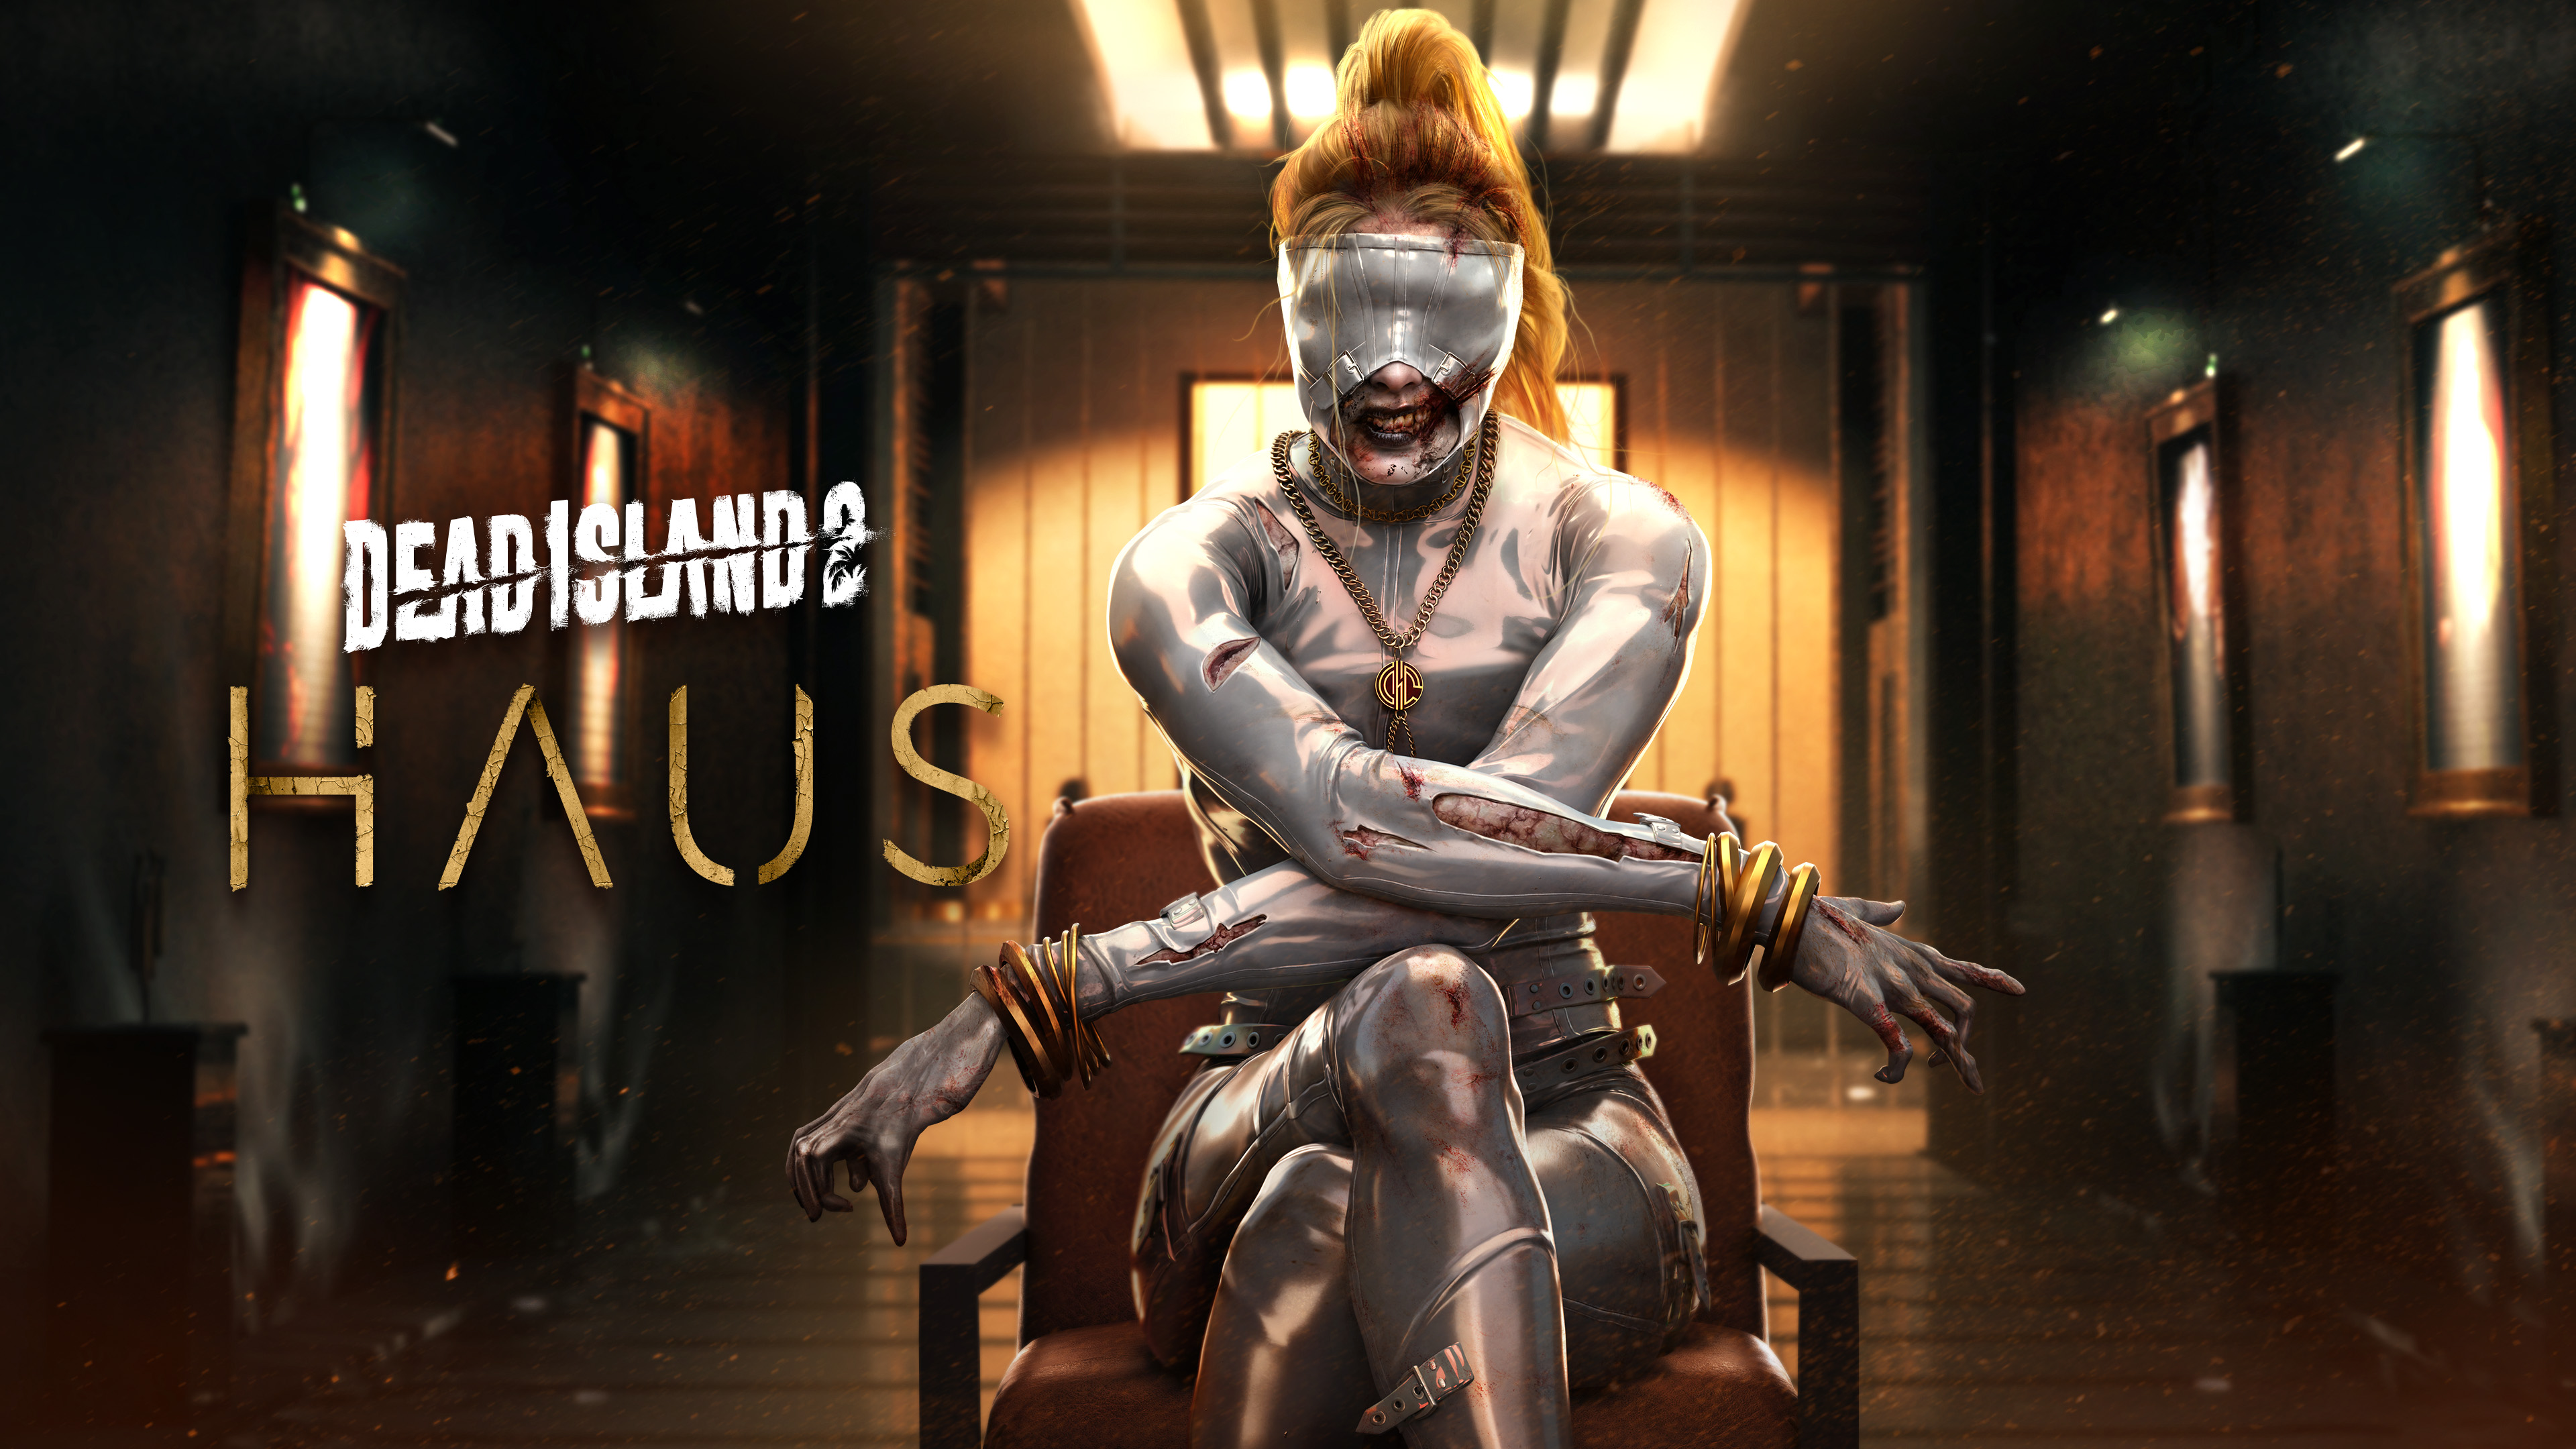 Dead Island 2 shares a release date for its first story DLC: Haus -  Meristation